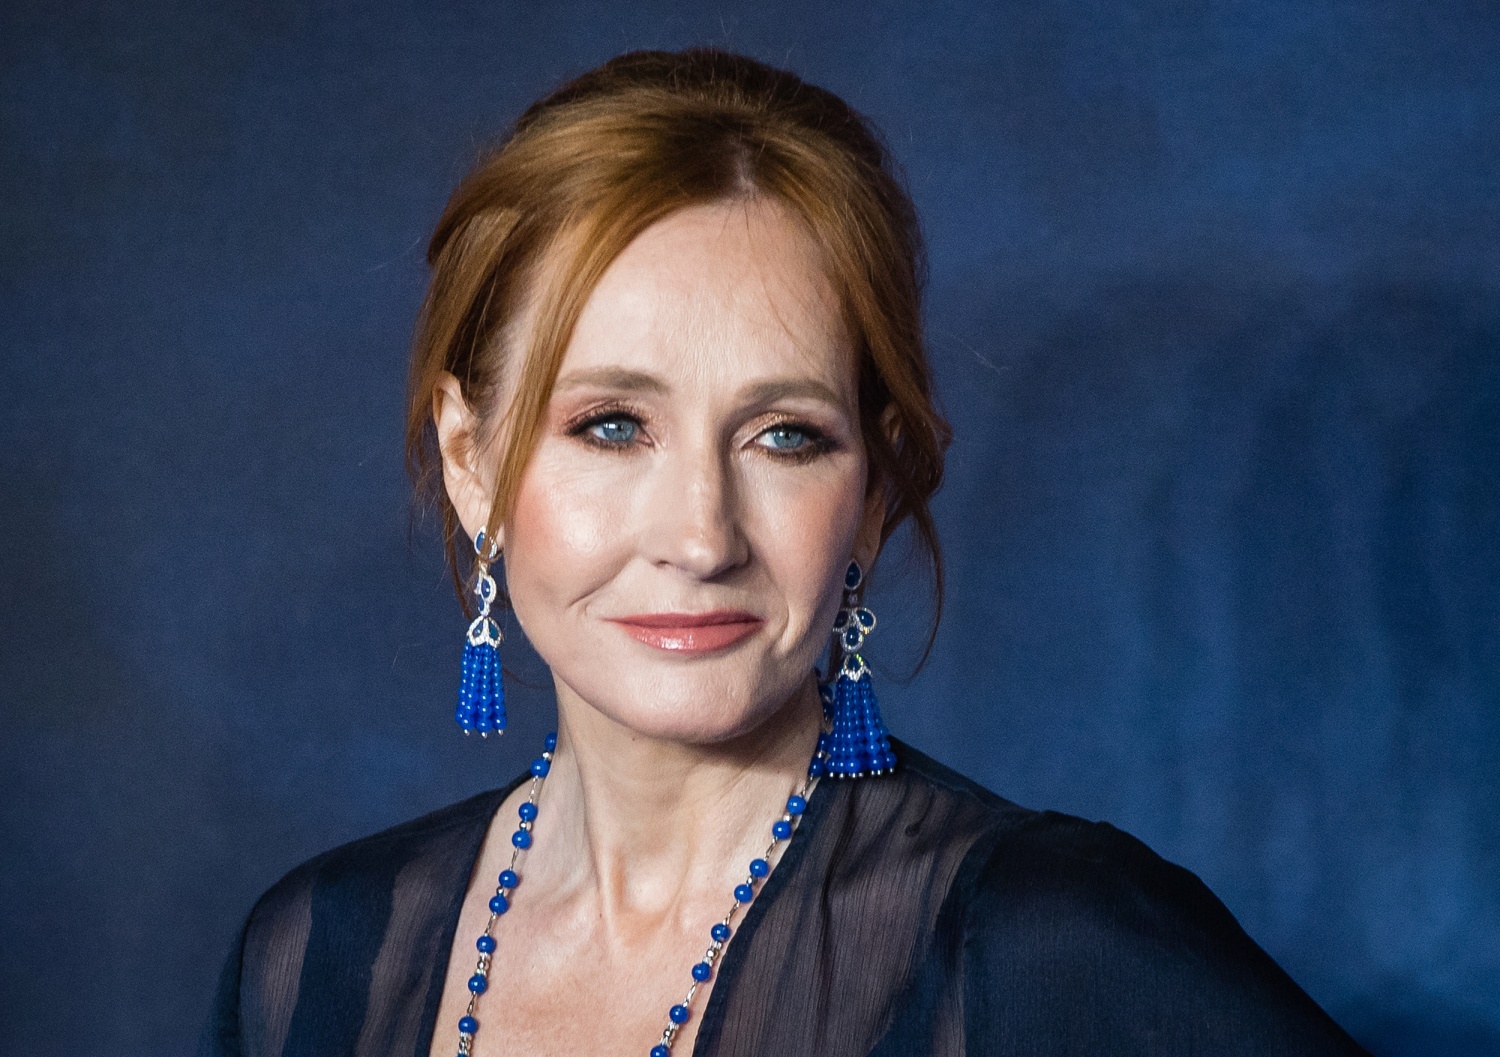 J.K. Rowling Has Been Getting Heat From Left and Right